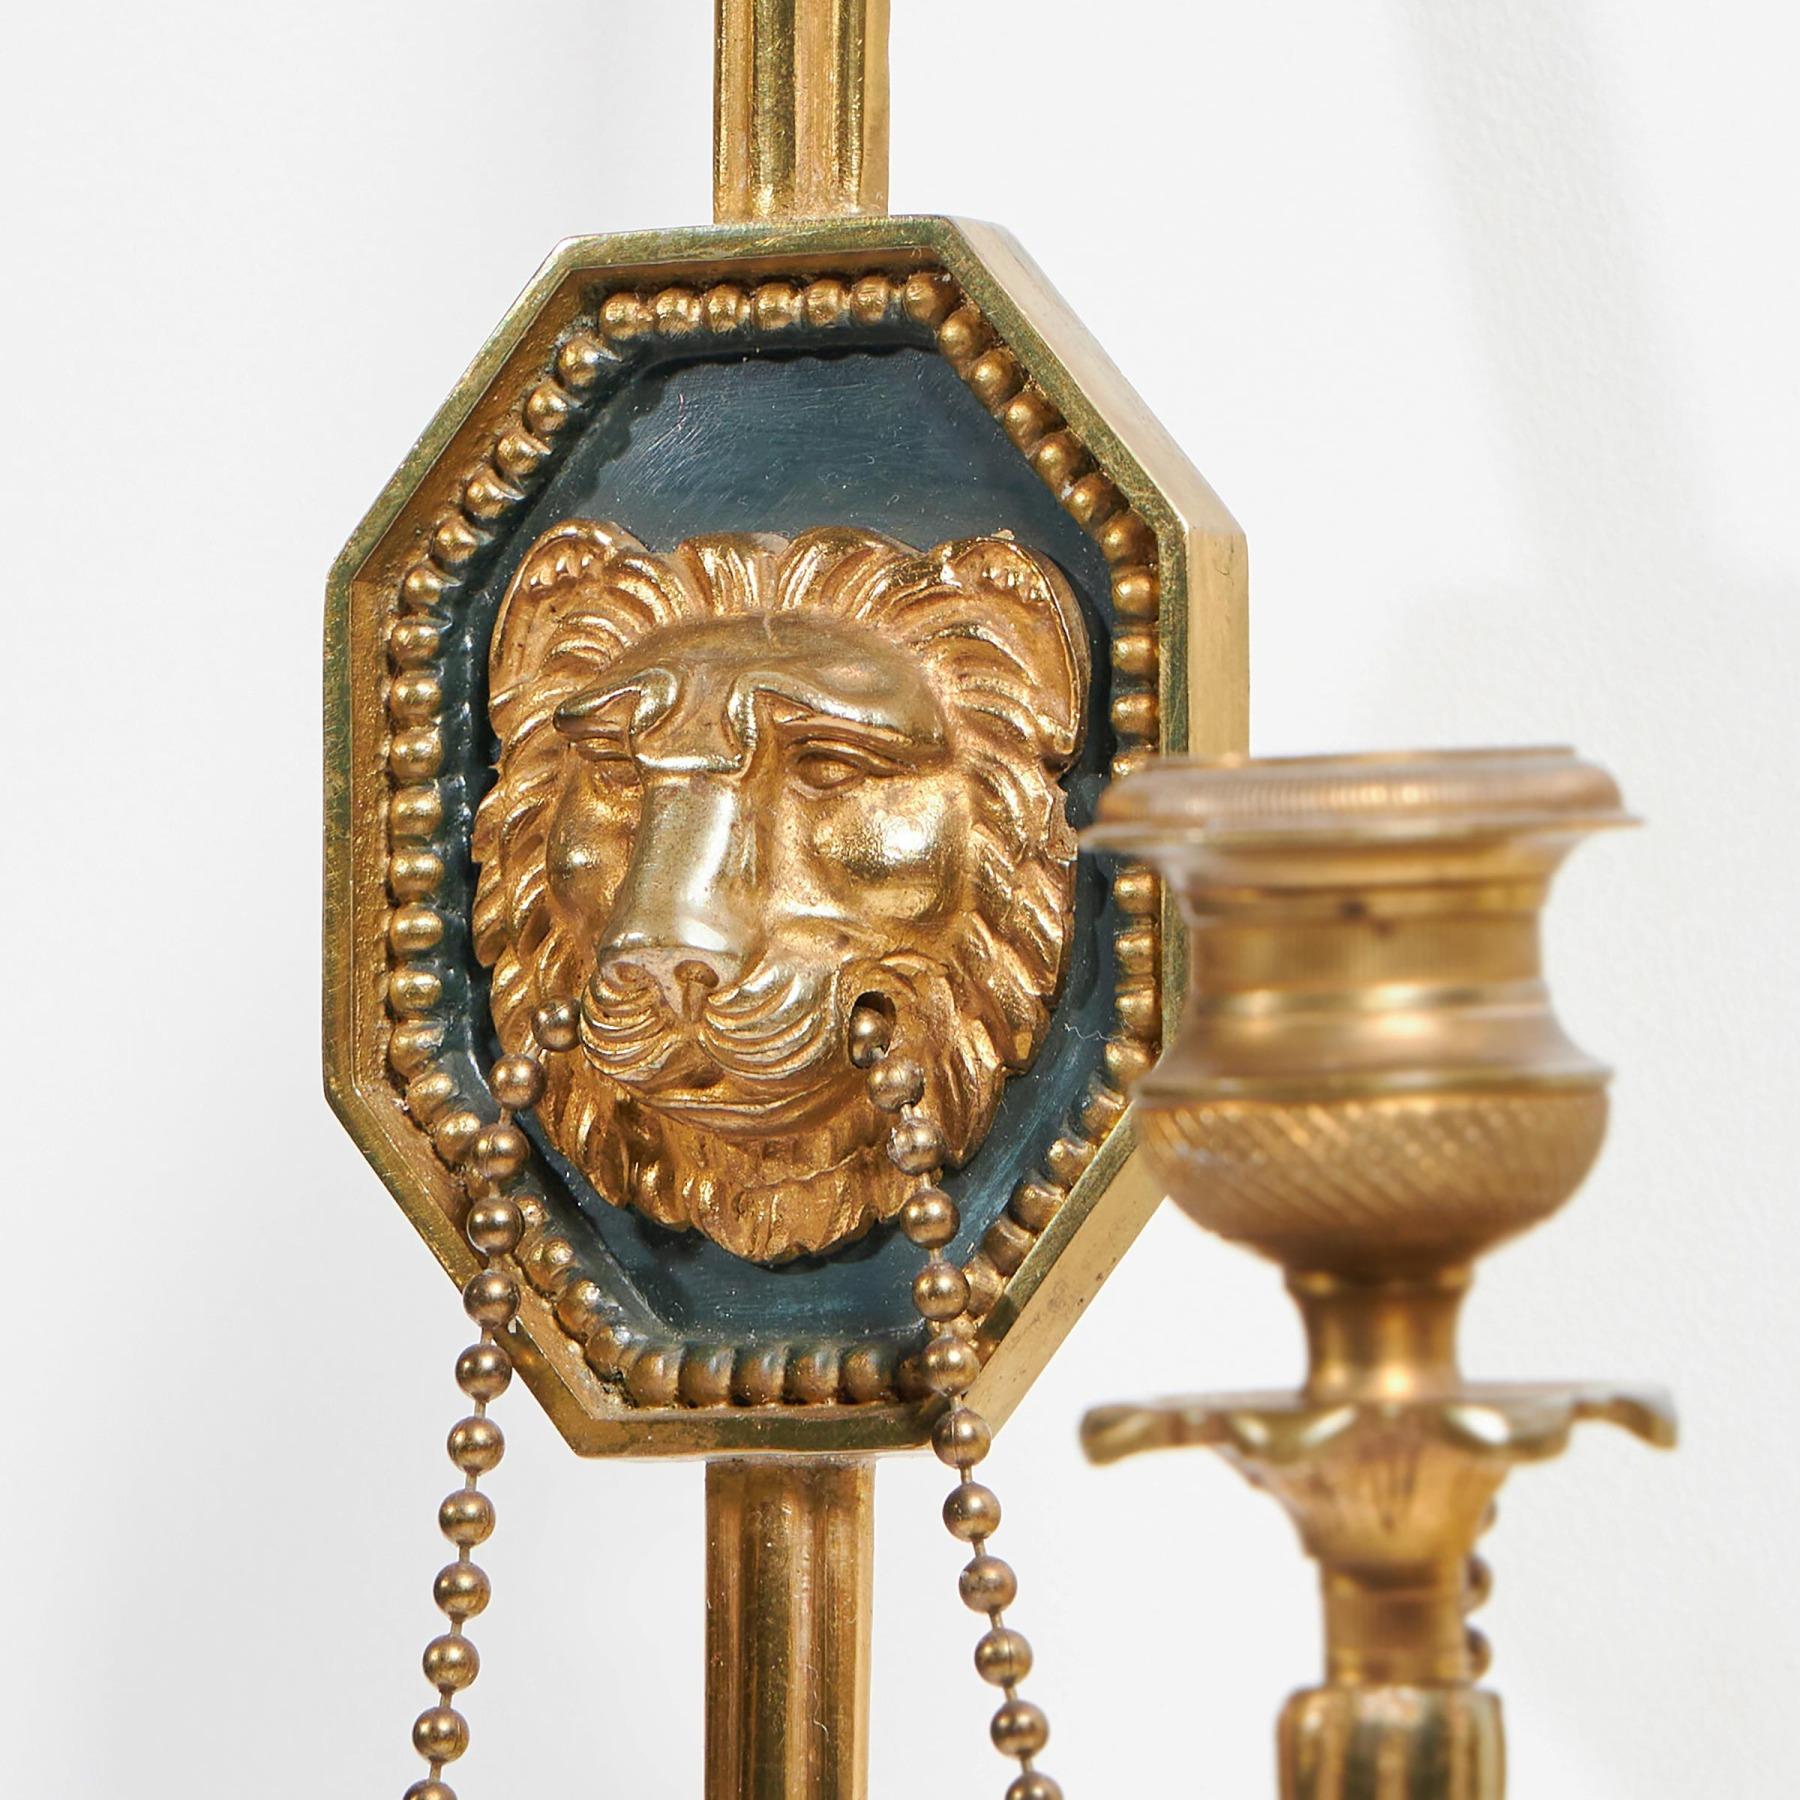 Fine Pair of Italian Ormolu Wall Lights or Appliques in the French Empire Style In Good Condition For Sale In Benington, Herts